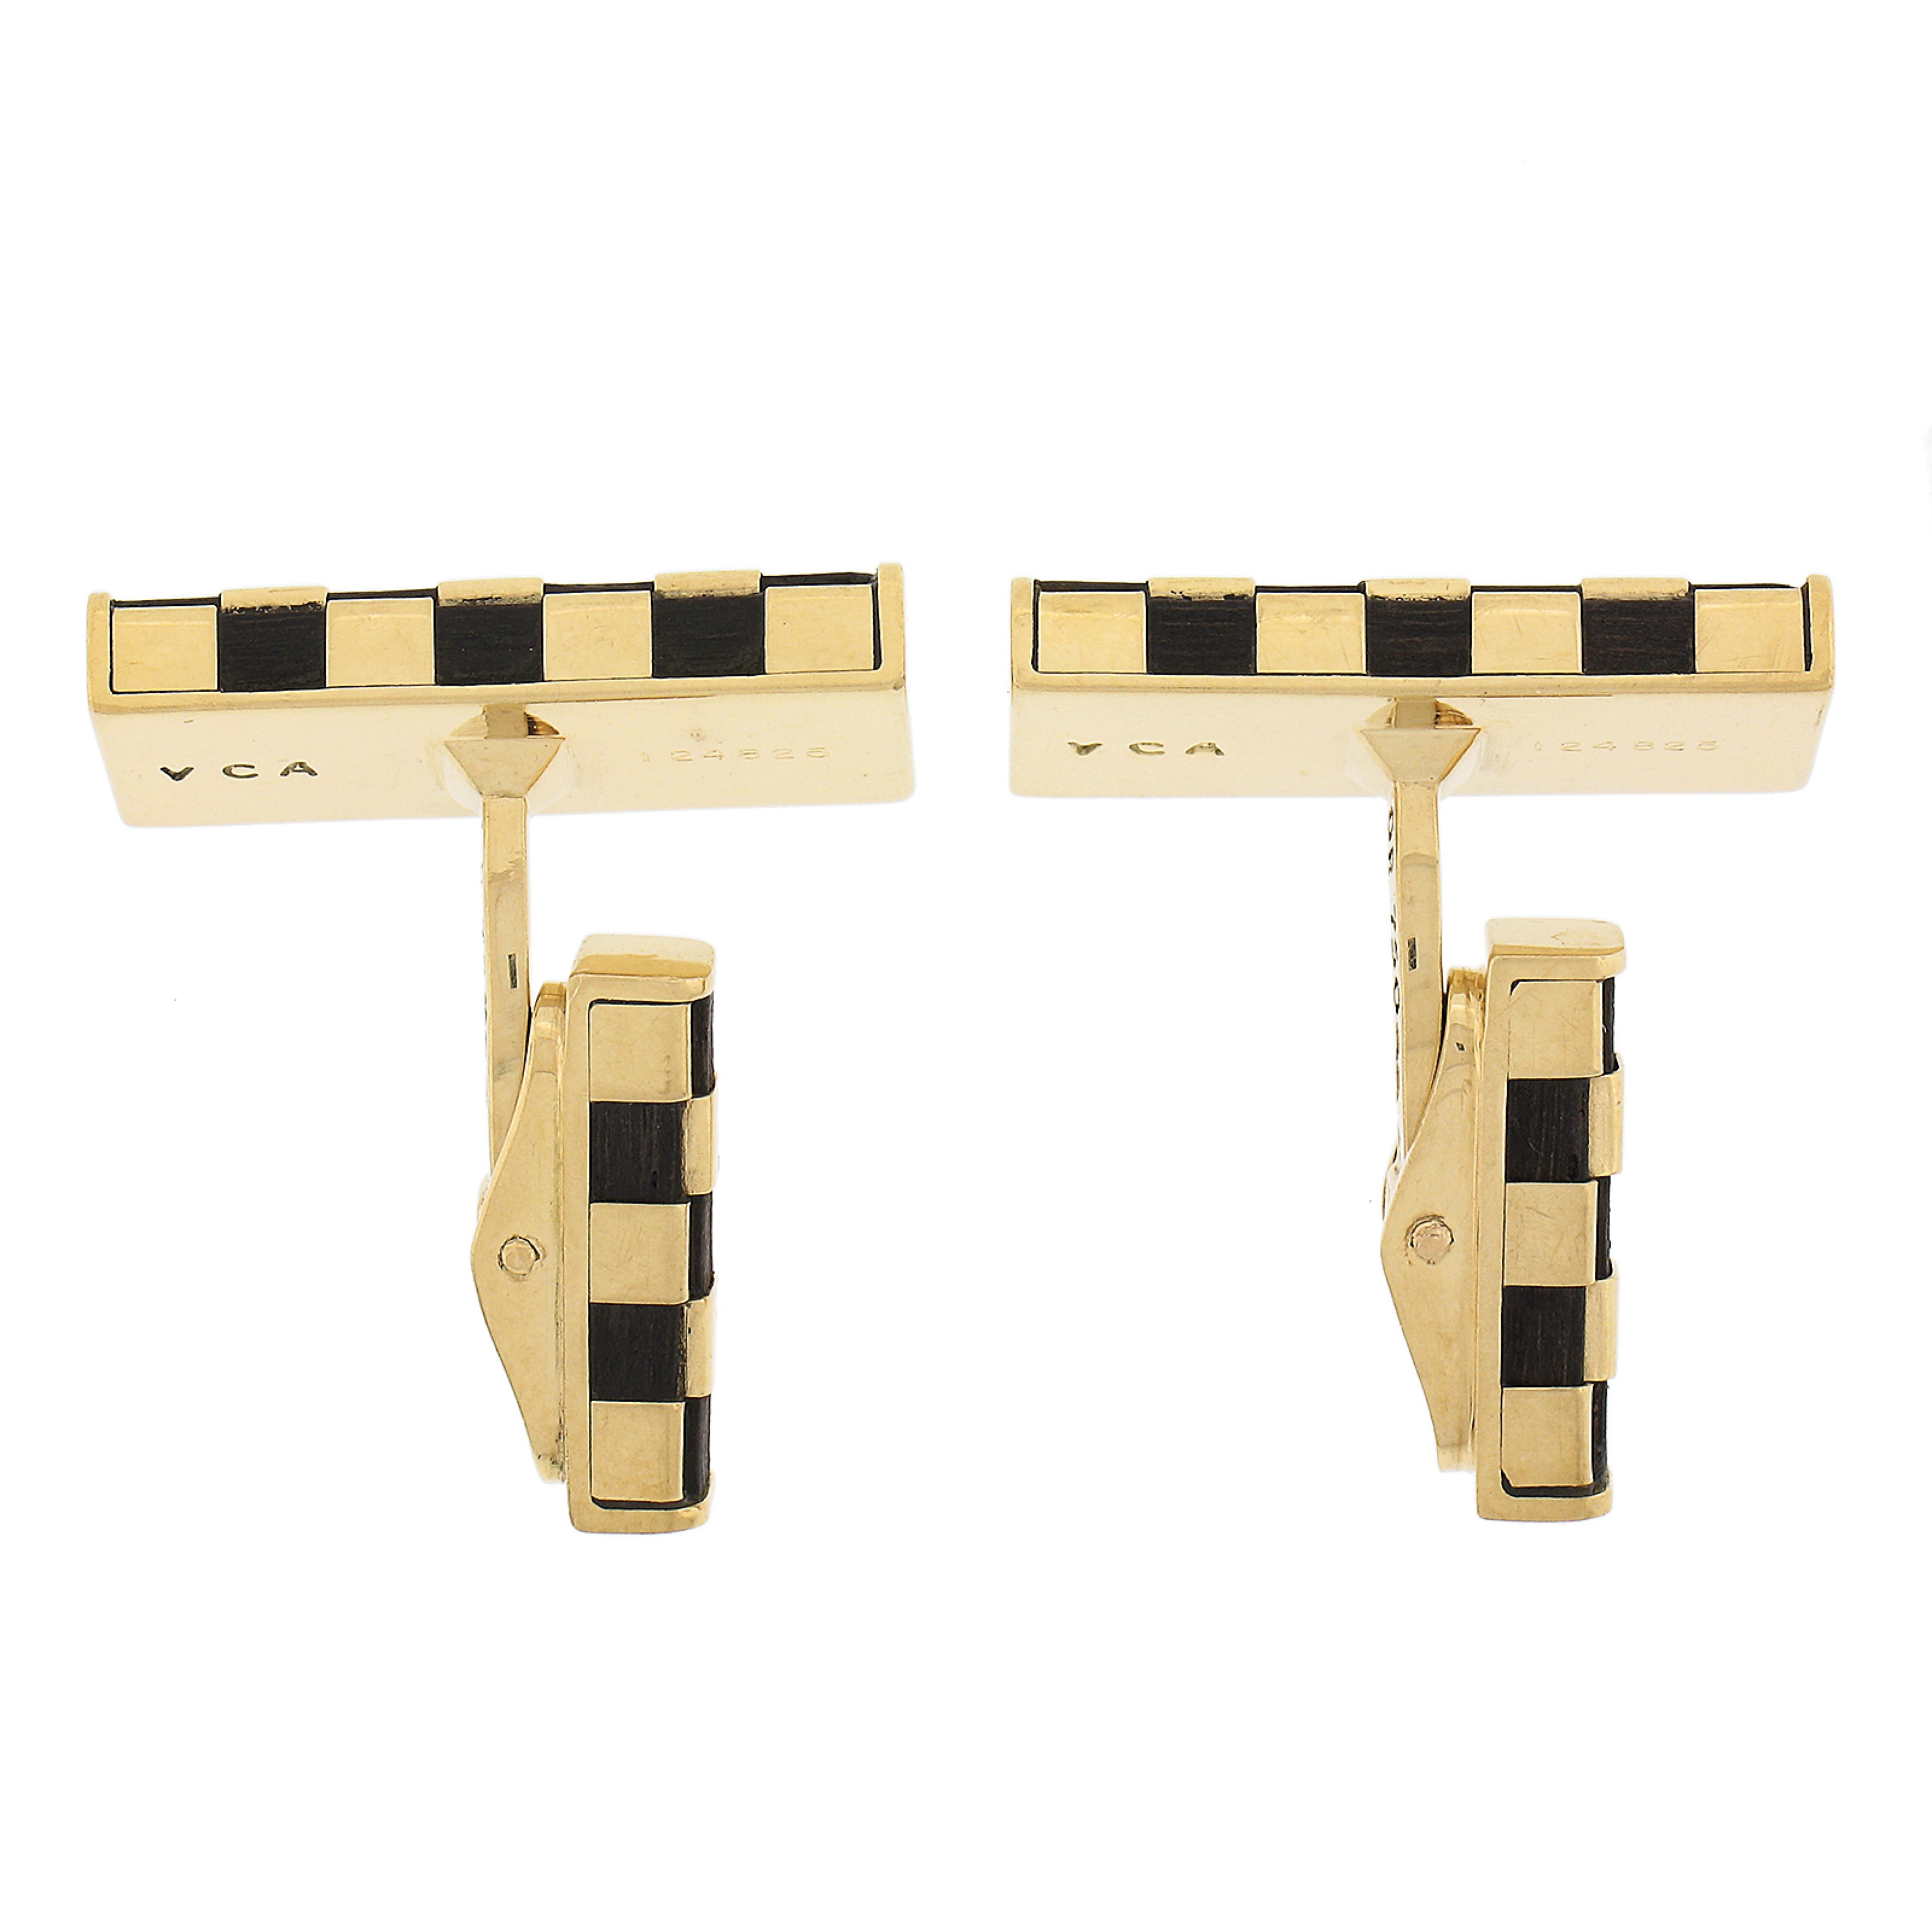 Van Cleef & Arpels Vca French 18k Gold Wood Checkerboard Rectangular Cufflinks In Excellent Condition For Sale In Montclair, NJ